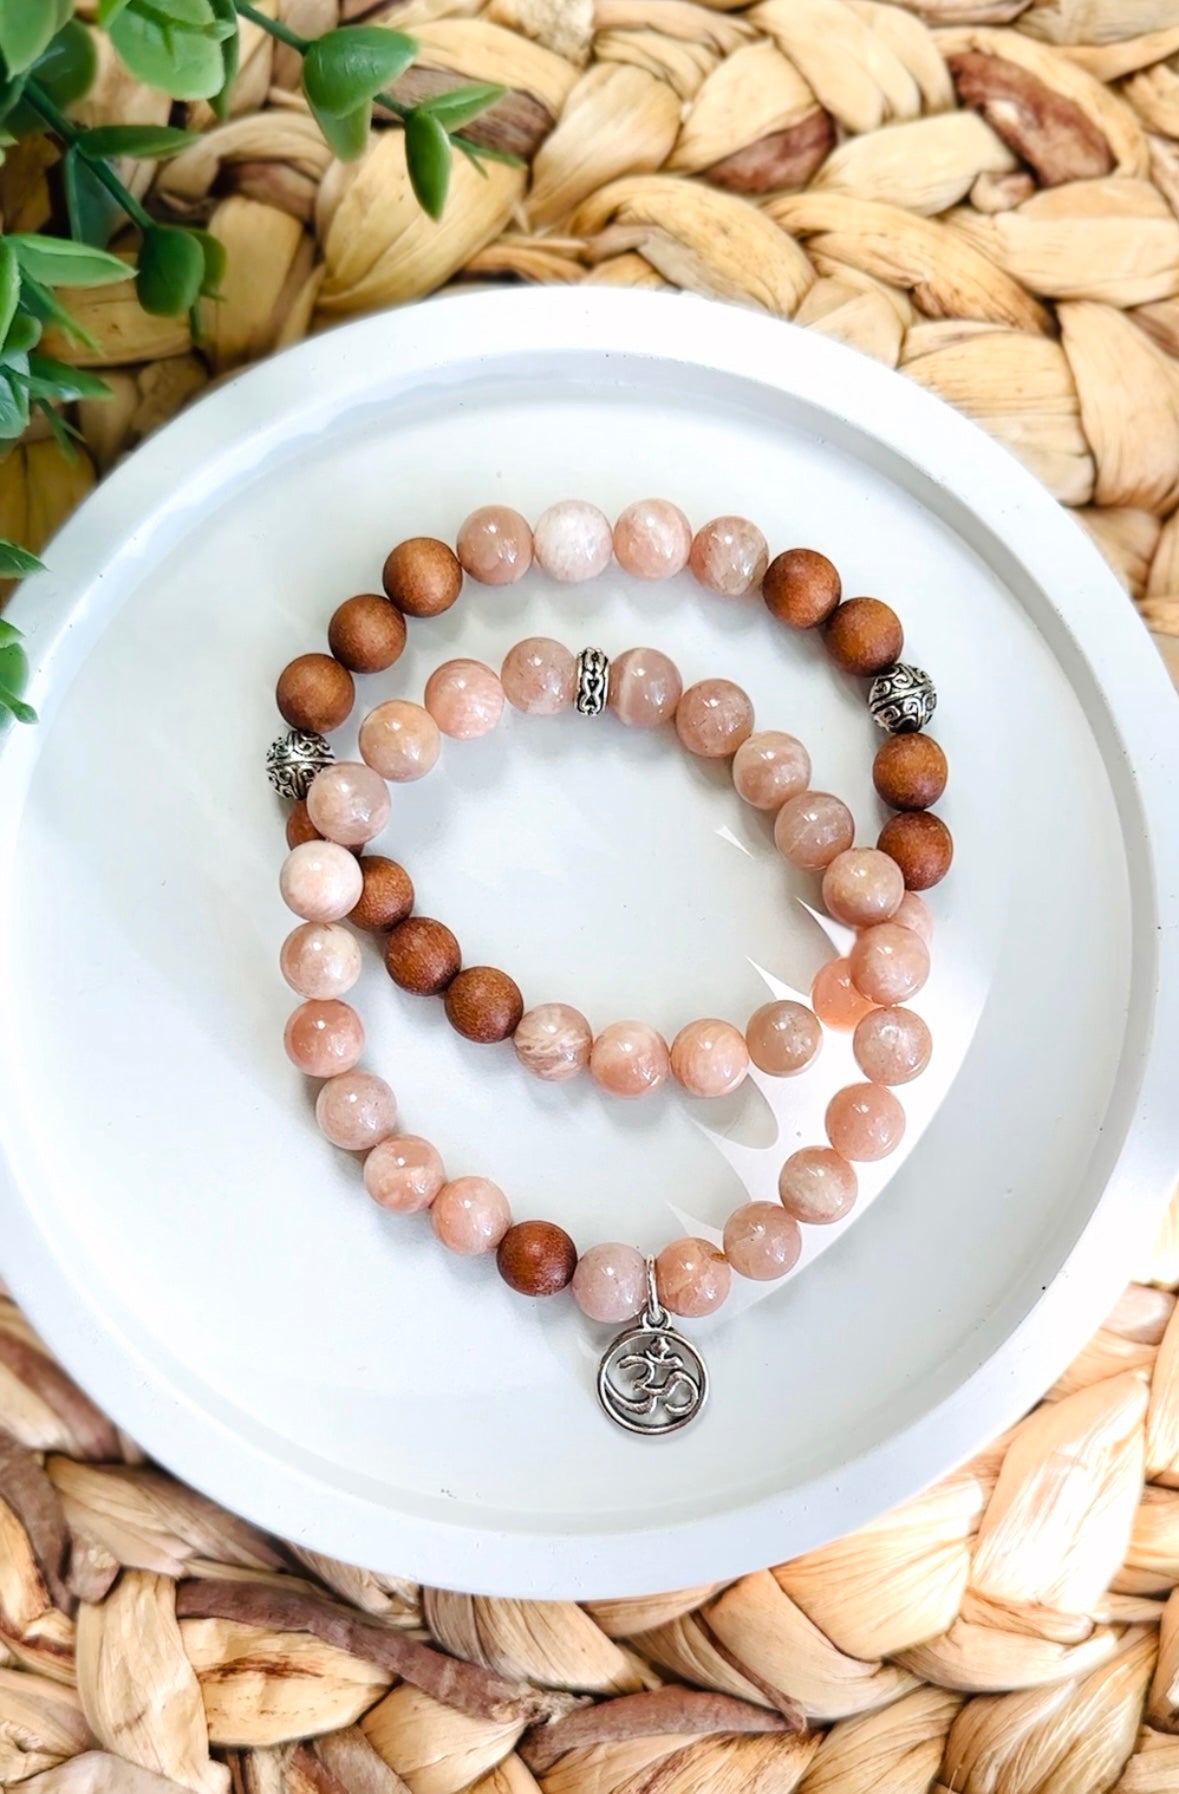 Gemstone bracelets Sunstone to bring joy and vitality.
Sandalwood for grounding and calming energy.
The Om charm represents spiritual harmony.
Together they create a set promoting positivity, relaxation, and spiritual balance.